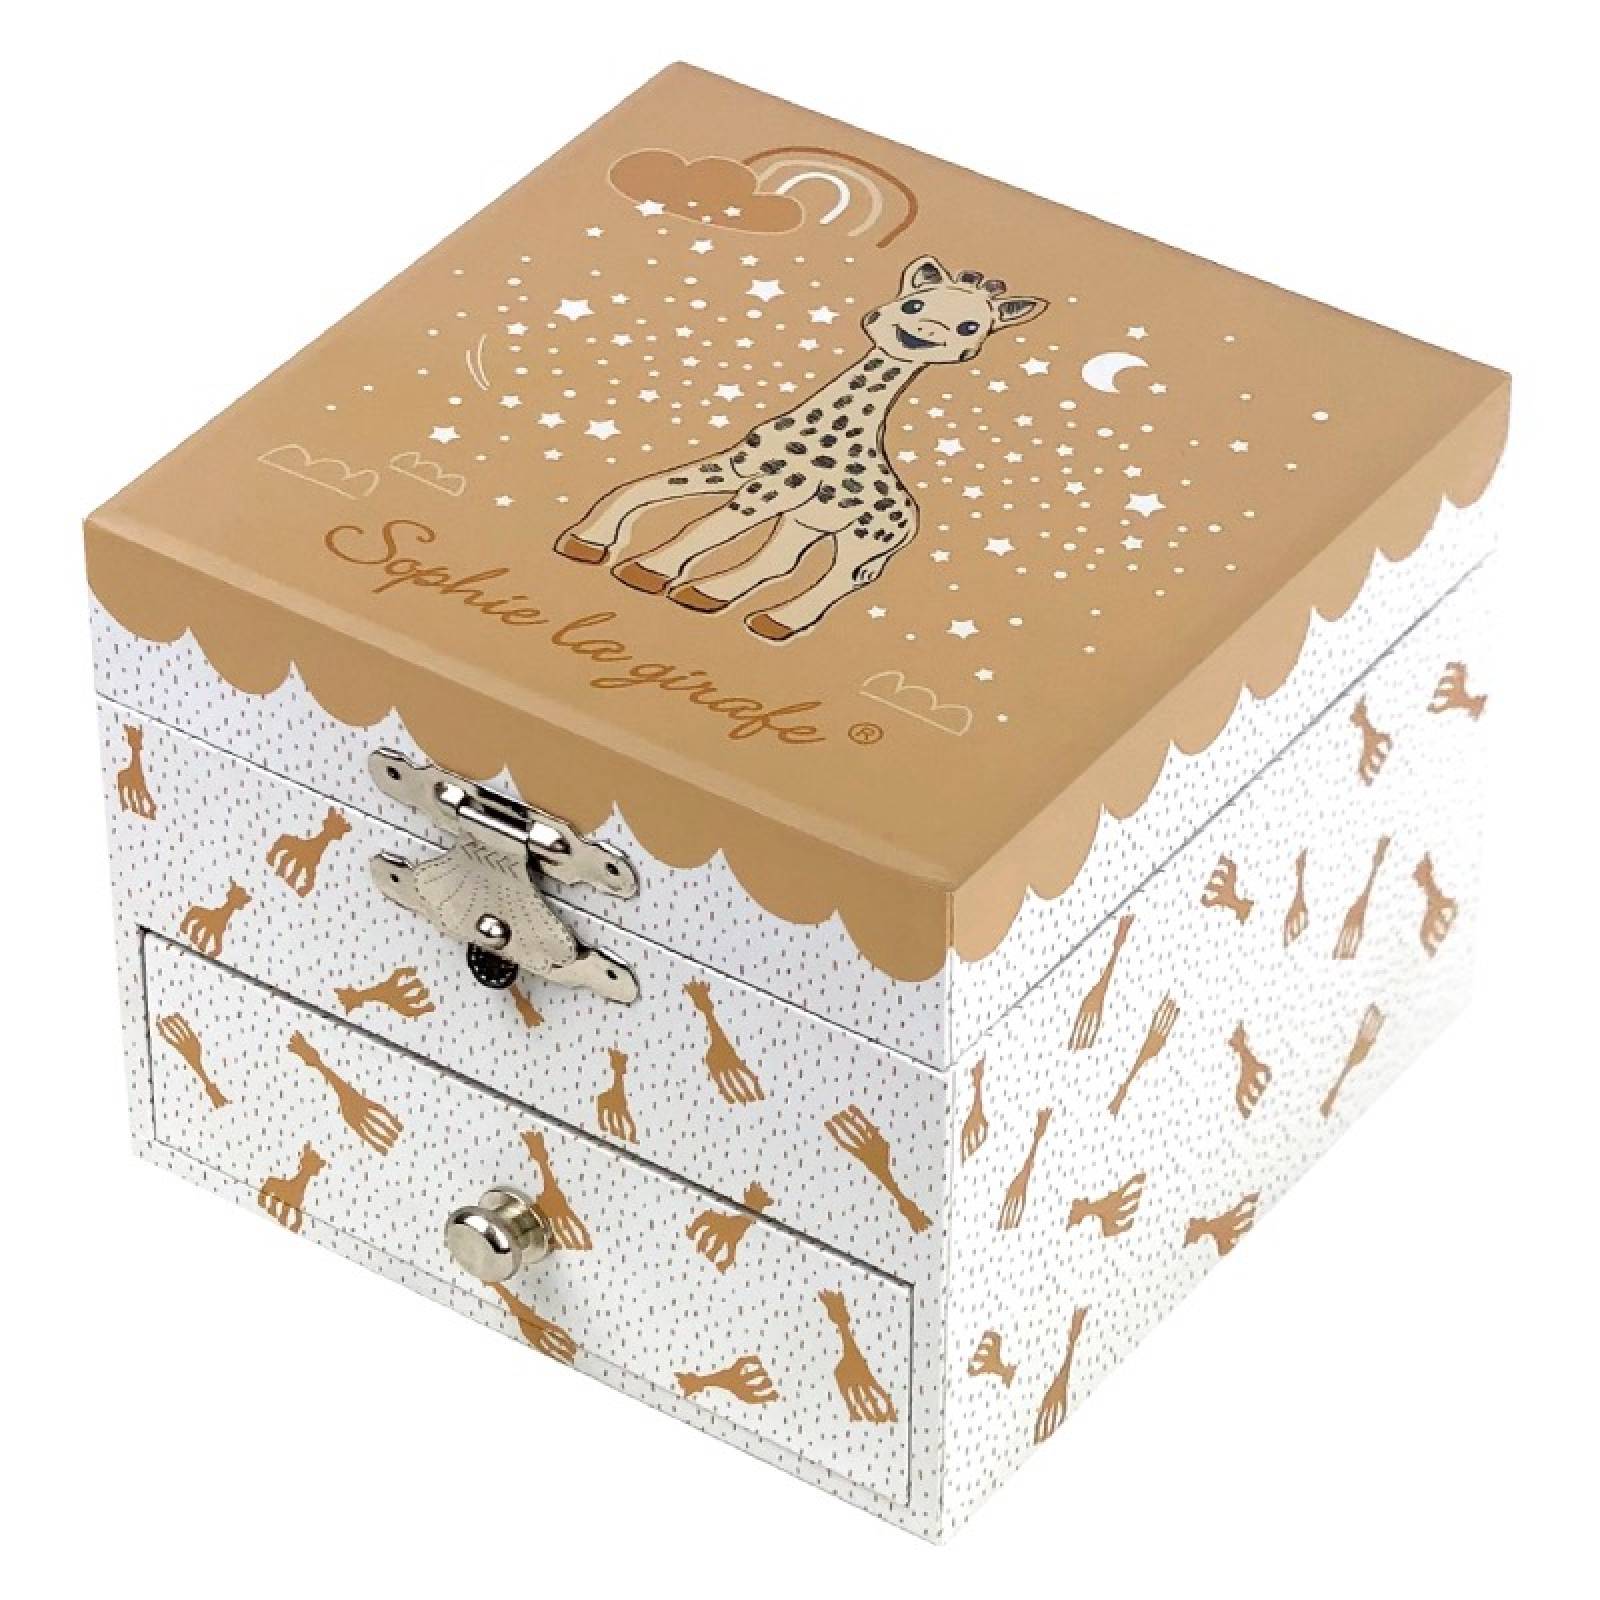 Sophie La Girafe Musical Jewellery Box With Drawer thumbnails